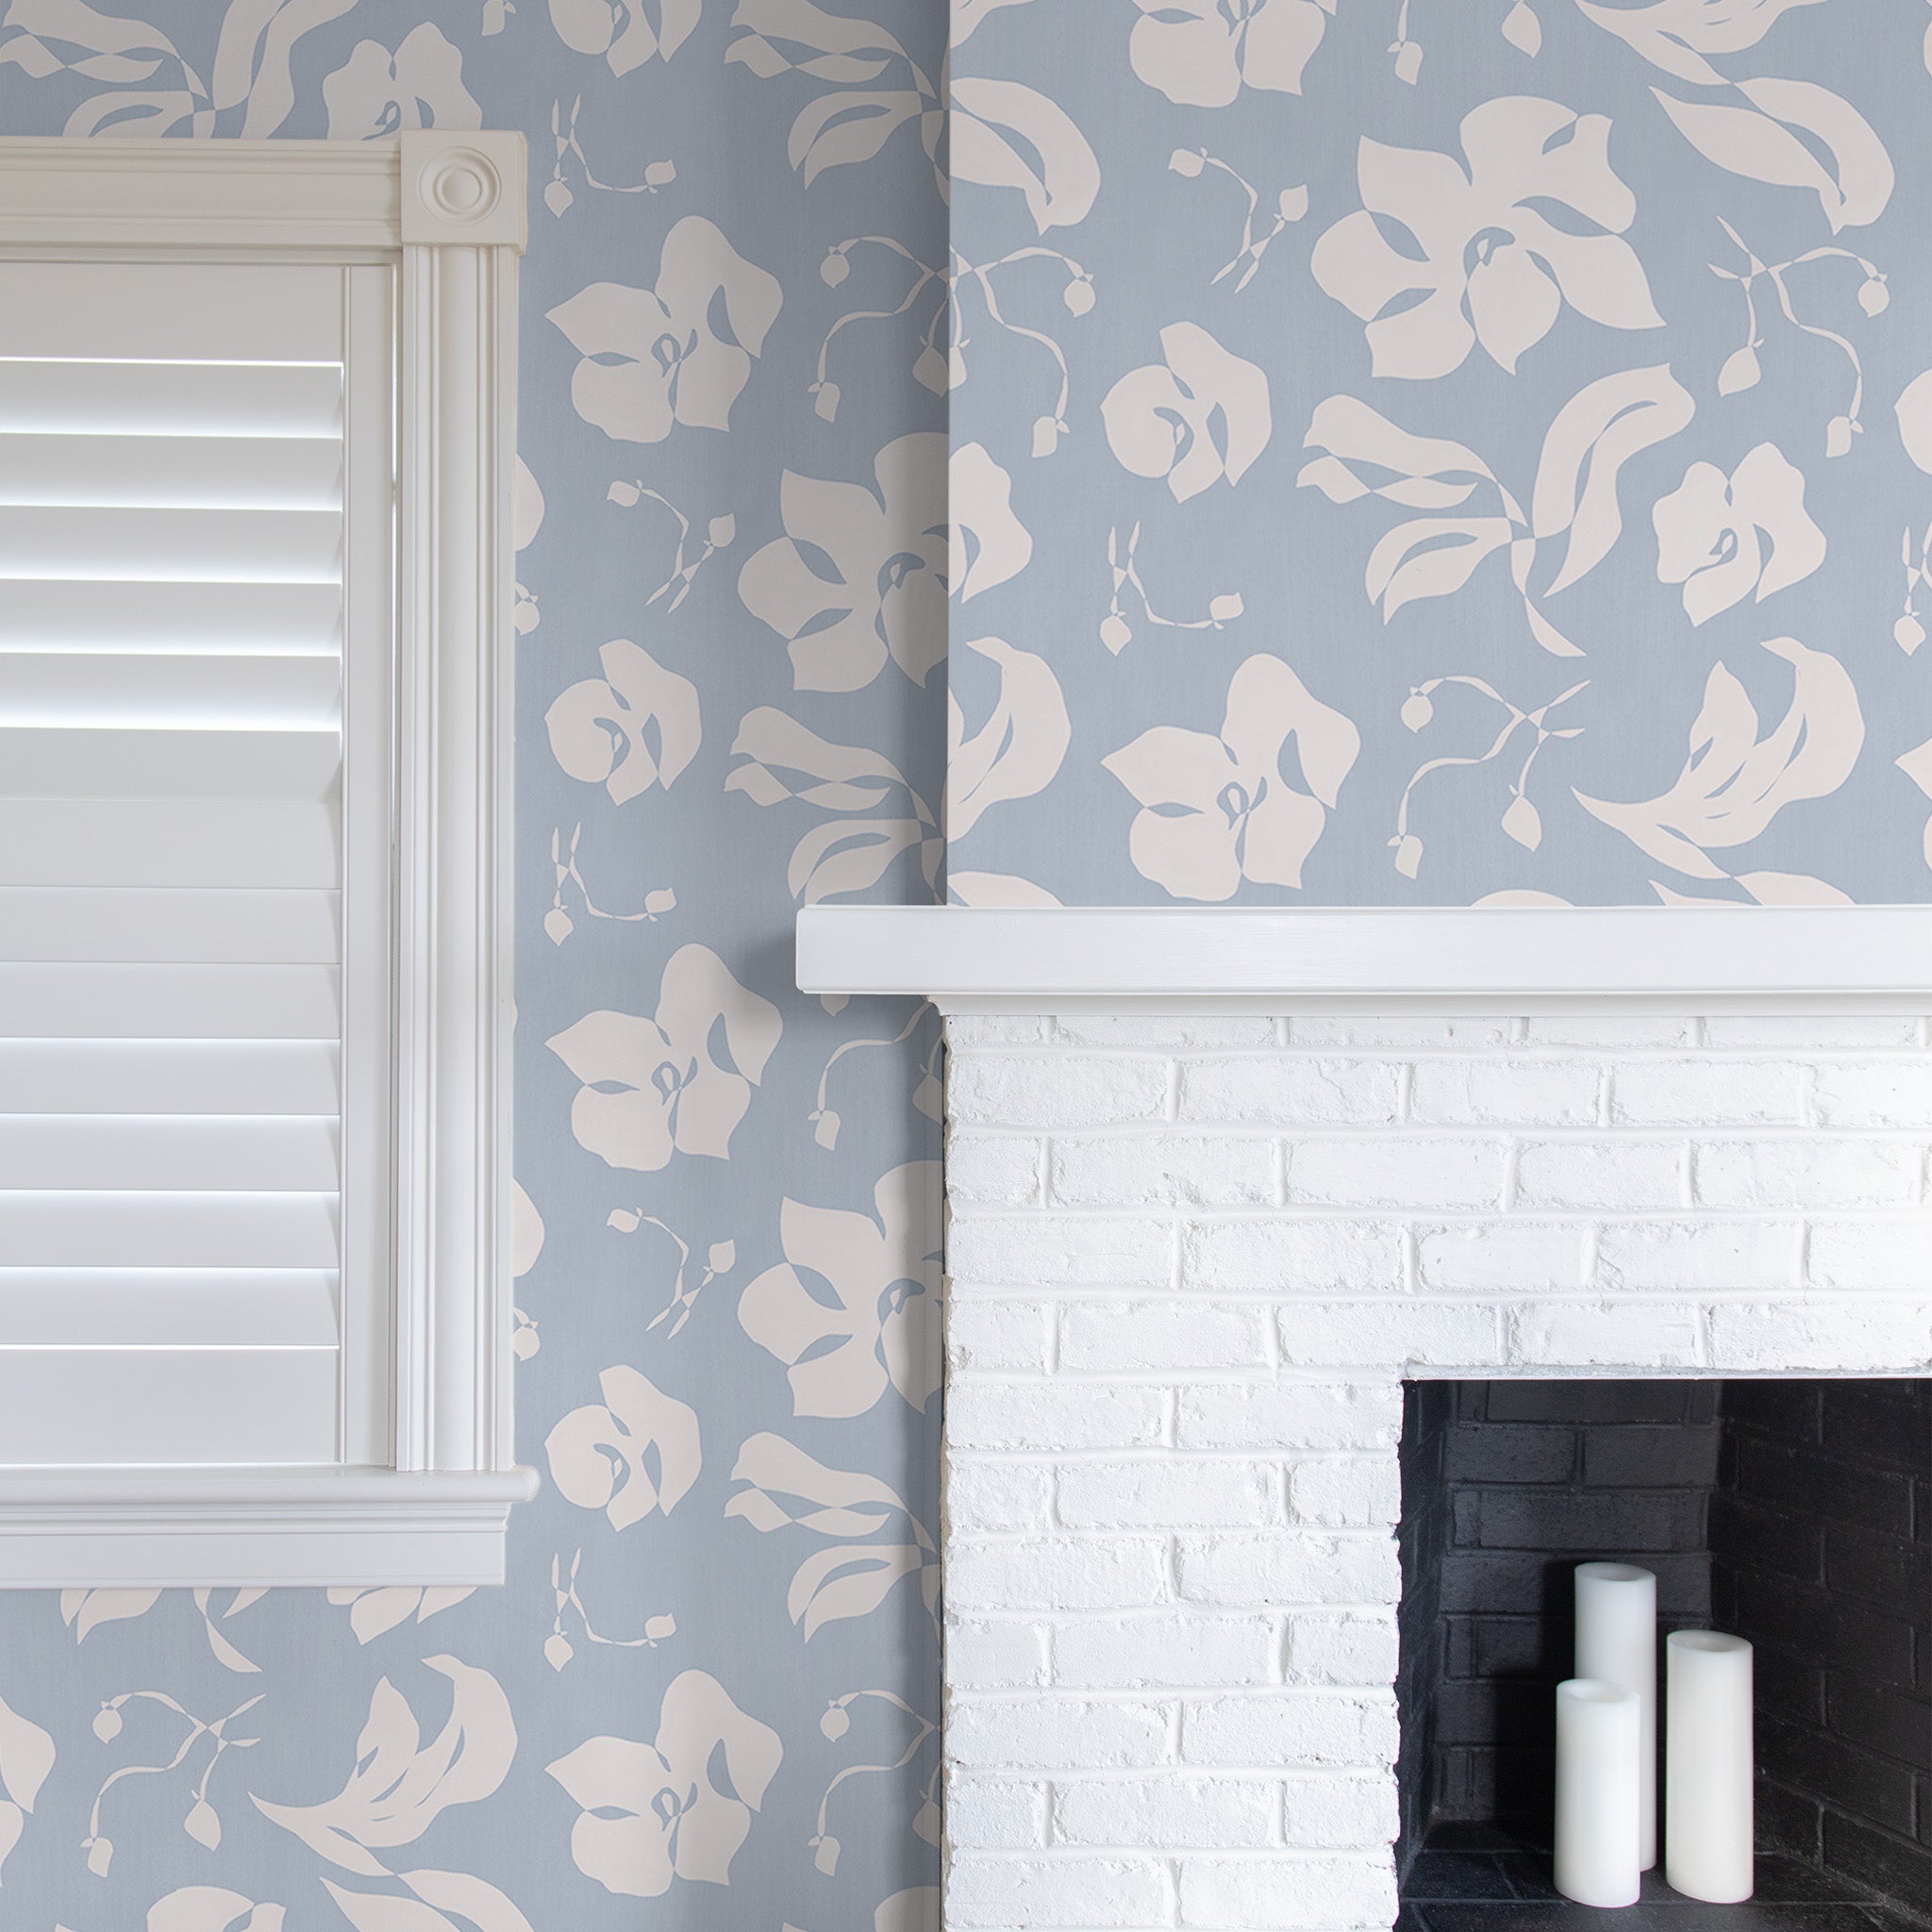 Close up of cornflower blue wallpaper in a room with a white fireplace and window with white shutters